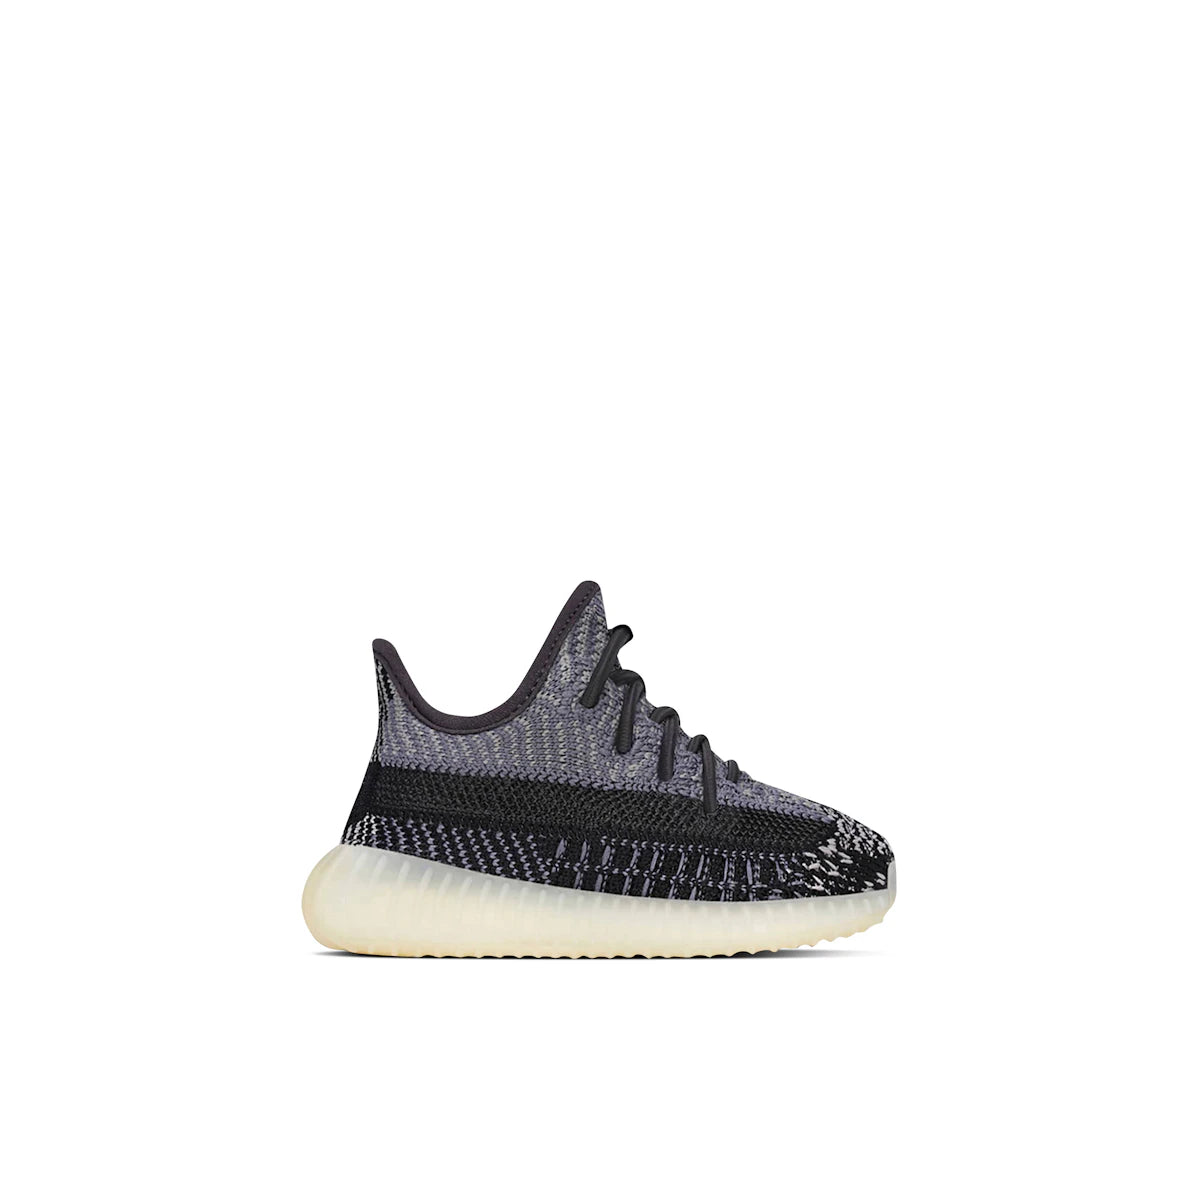 Infant Adidas Yeezy Boost 350 V2 Carbon